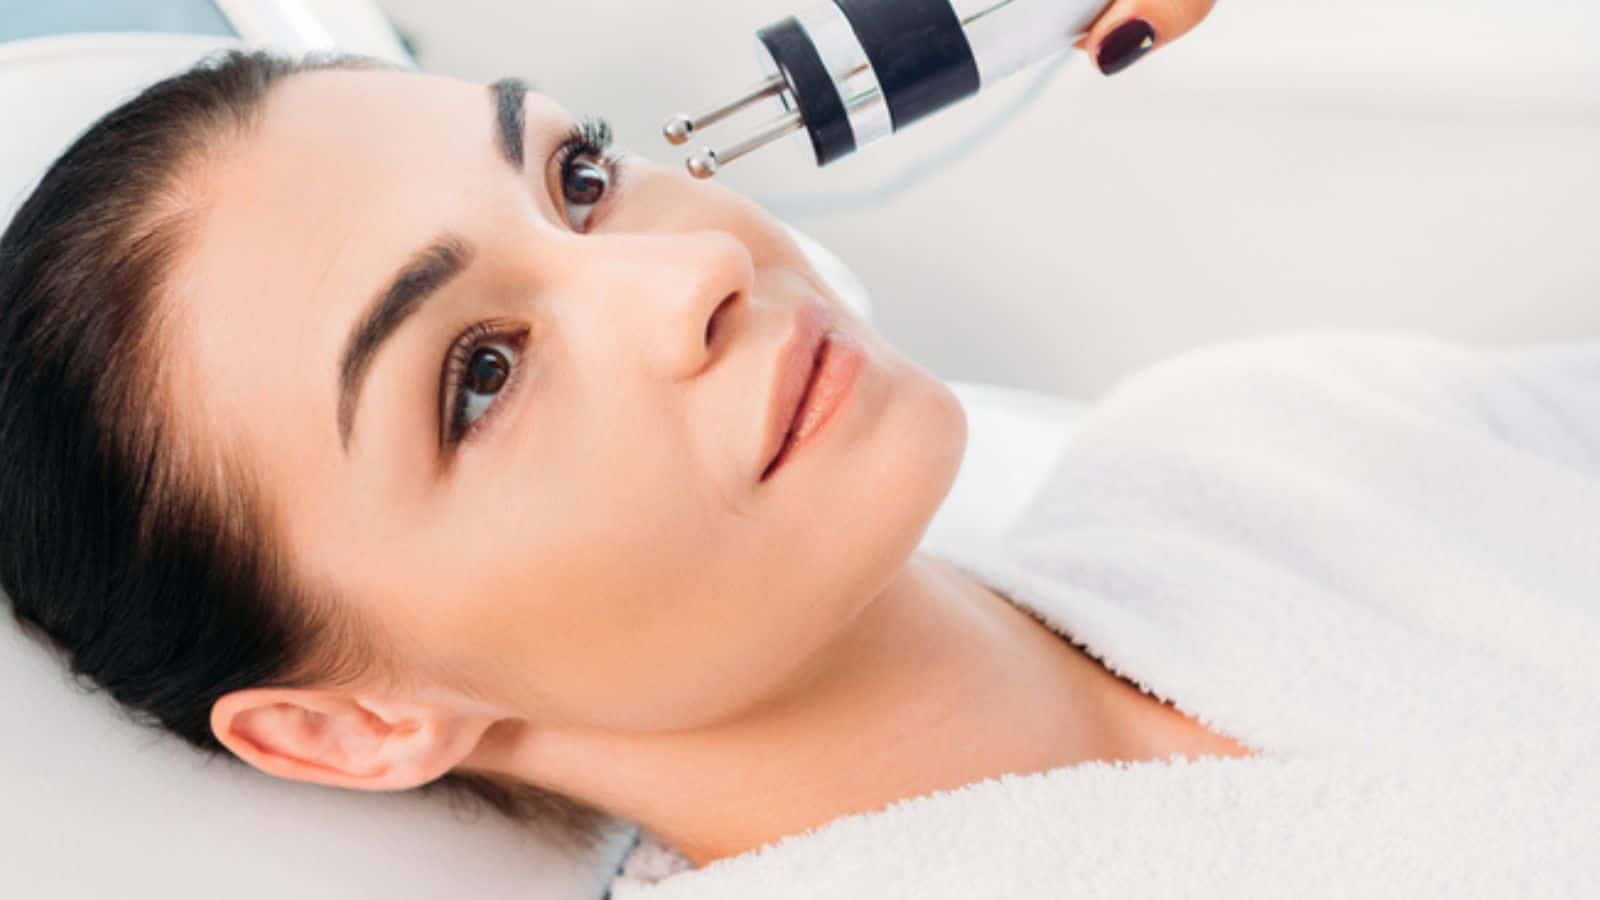 Attractive woman getting facial microcurrent therapy in spa salon